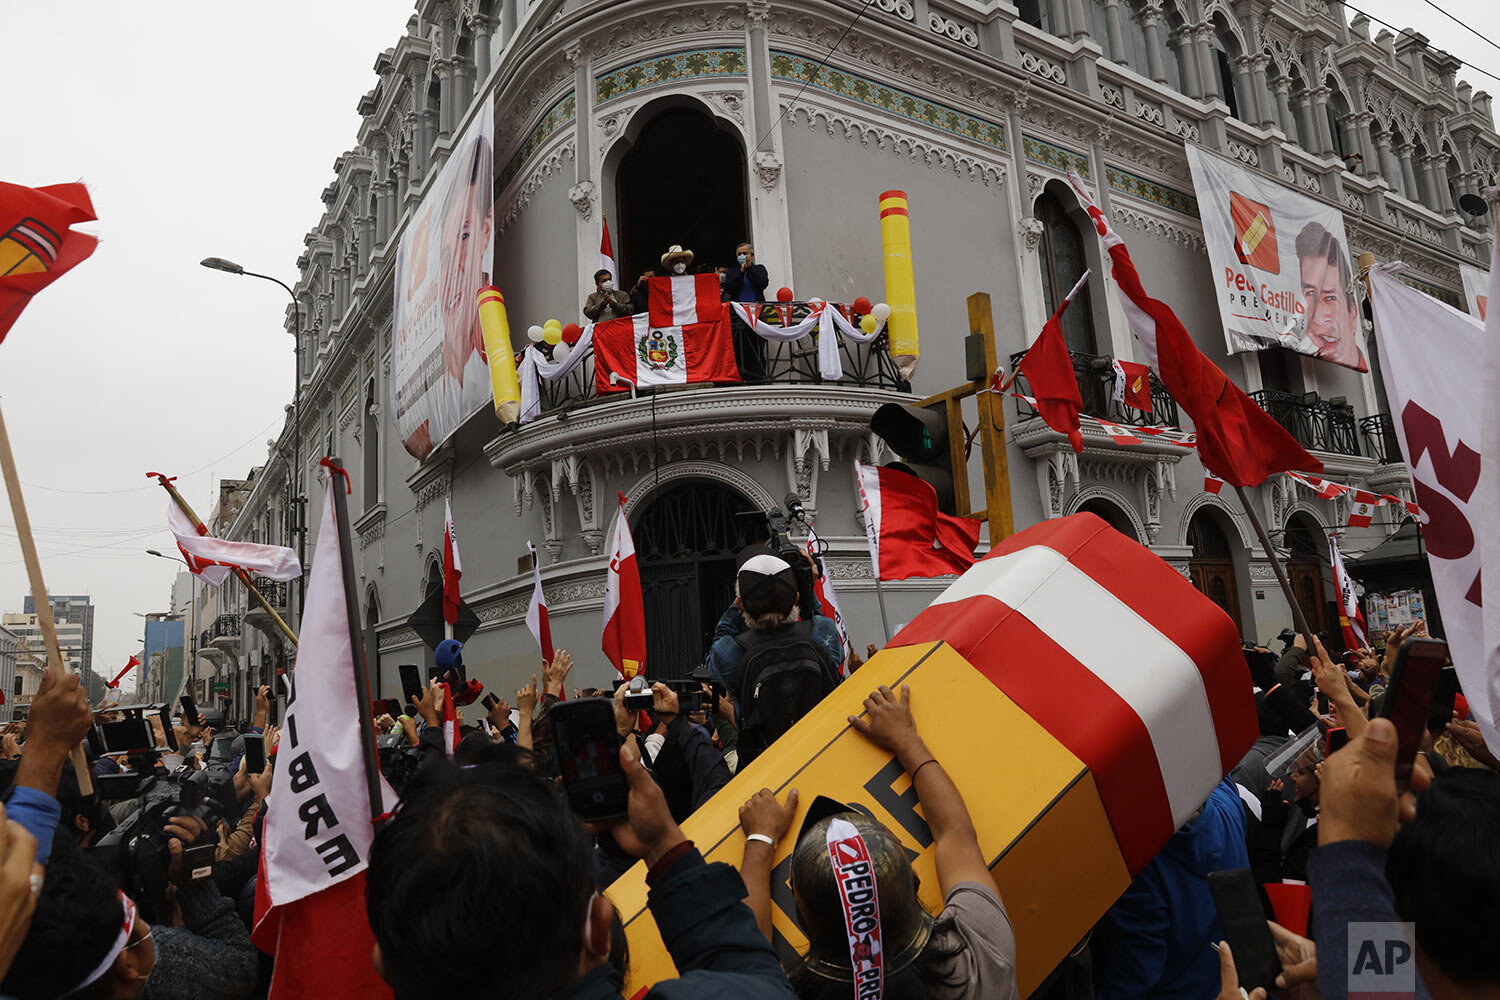  Presidential candidate Pedro Castillo looks out over supporters from the balcony of his campaign headquarters as they celebrate partial results in Lima, Peru, June 7, 2021, the day after the runoff election. (AP Photo/Guadalupe Pardo) 